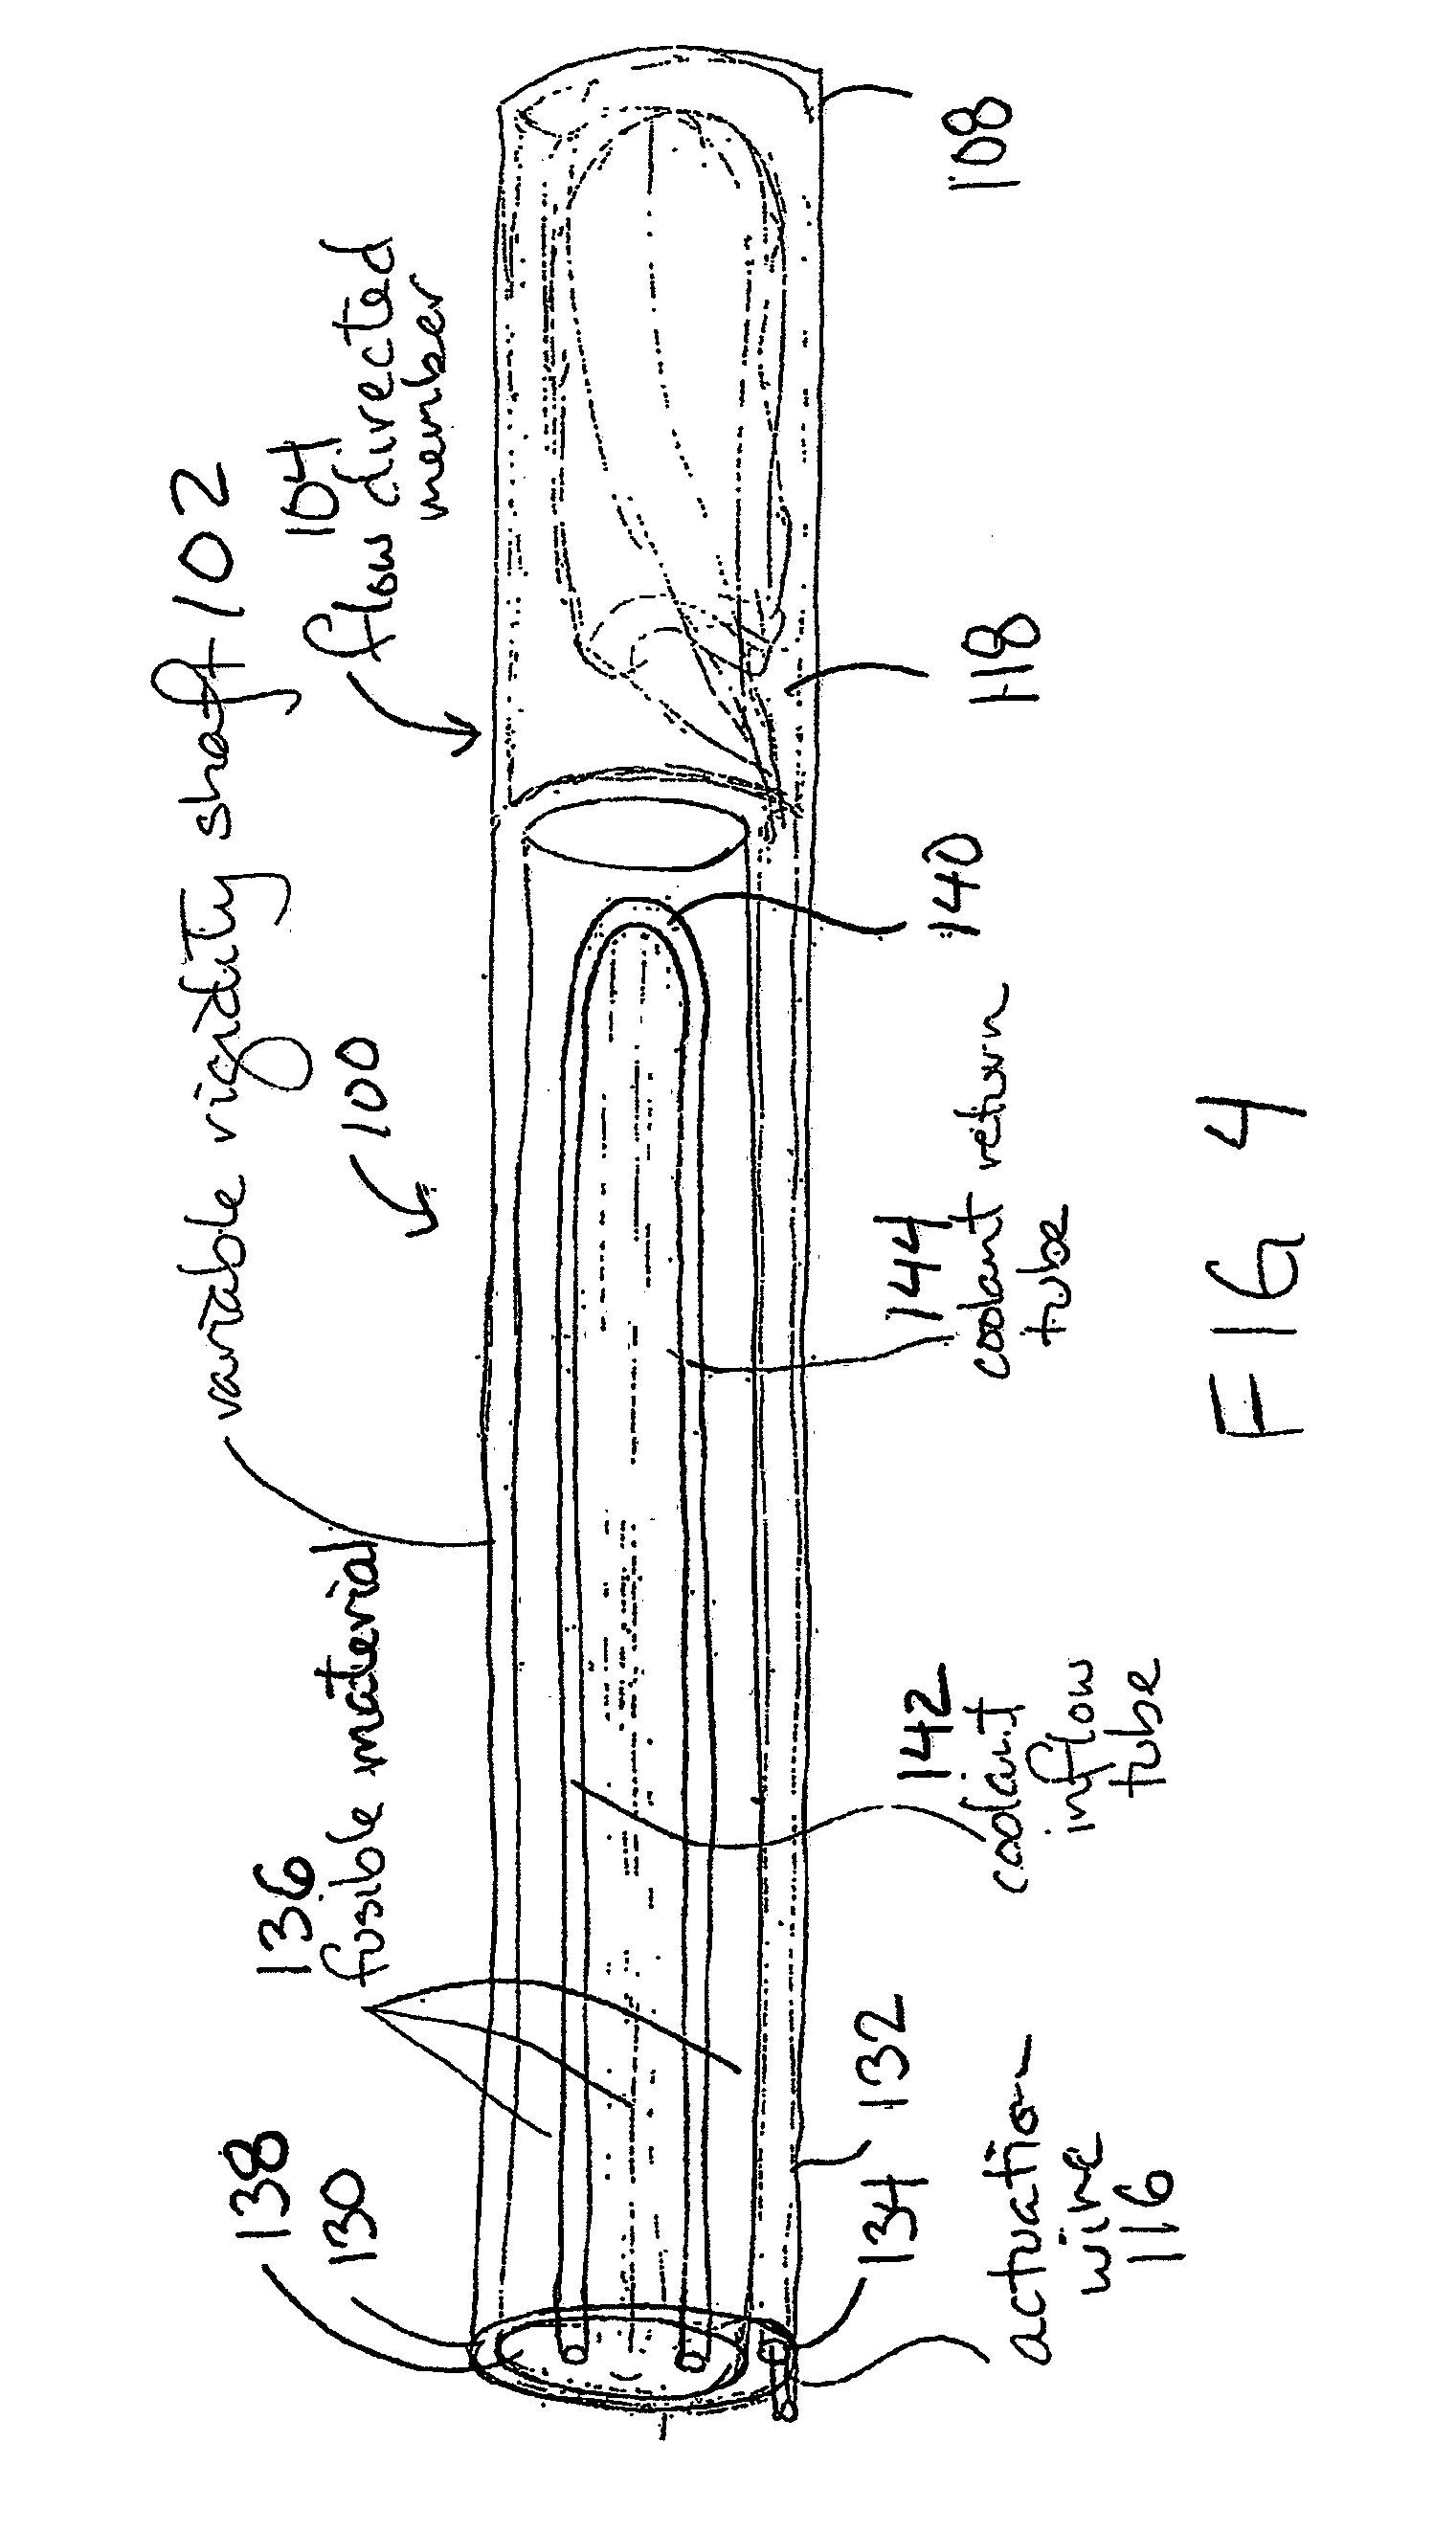 Flow-directed catheter guide with variable rigidity shaft